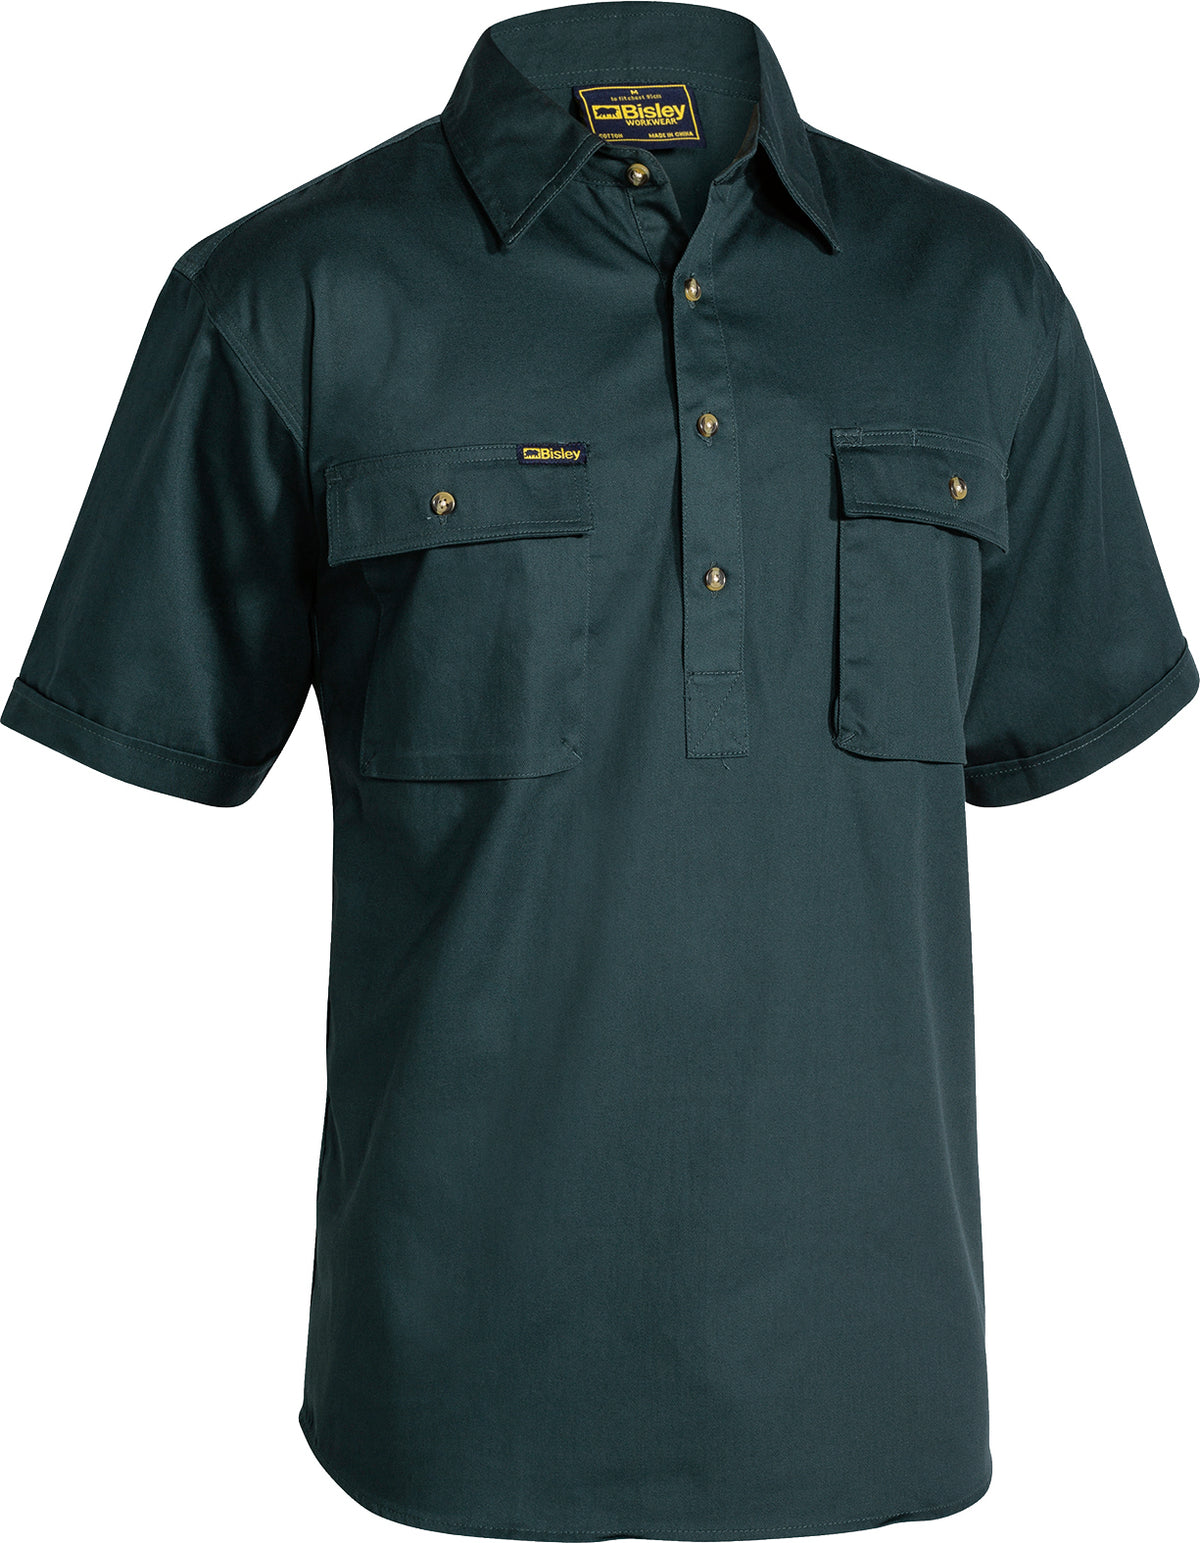 SHORT SLEEVE CLOSED FRONT WORK SHIRT